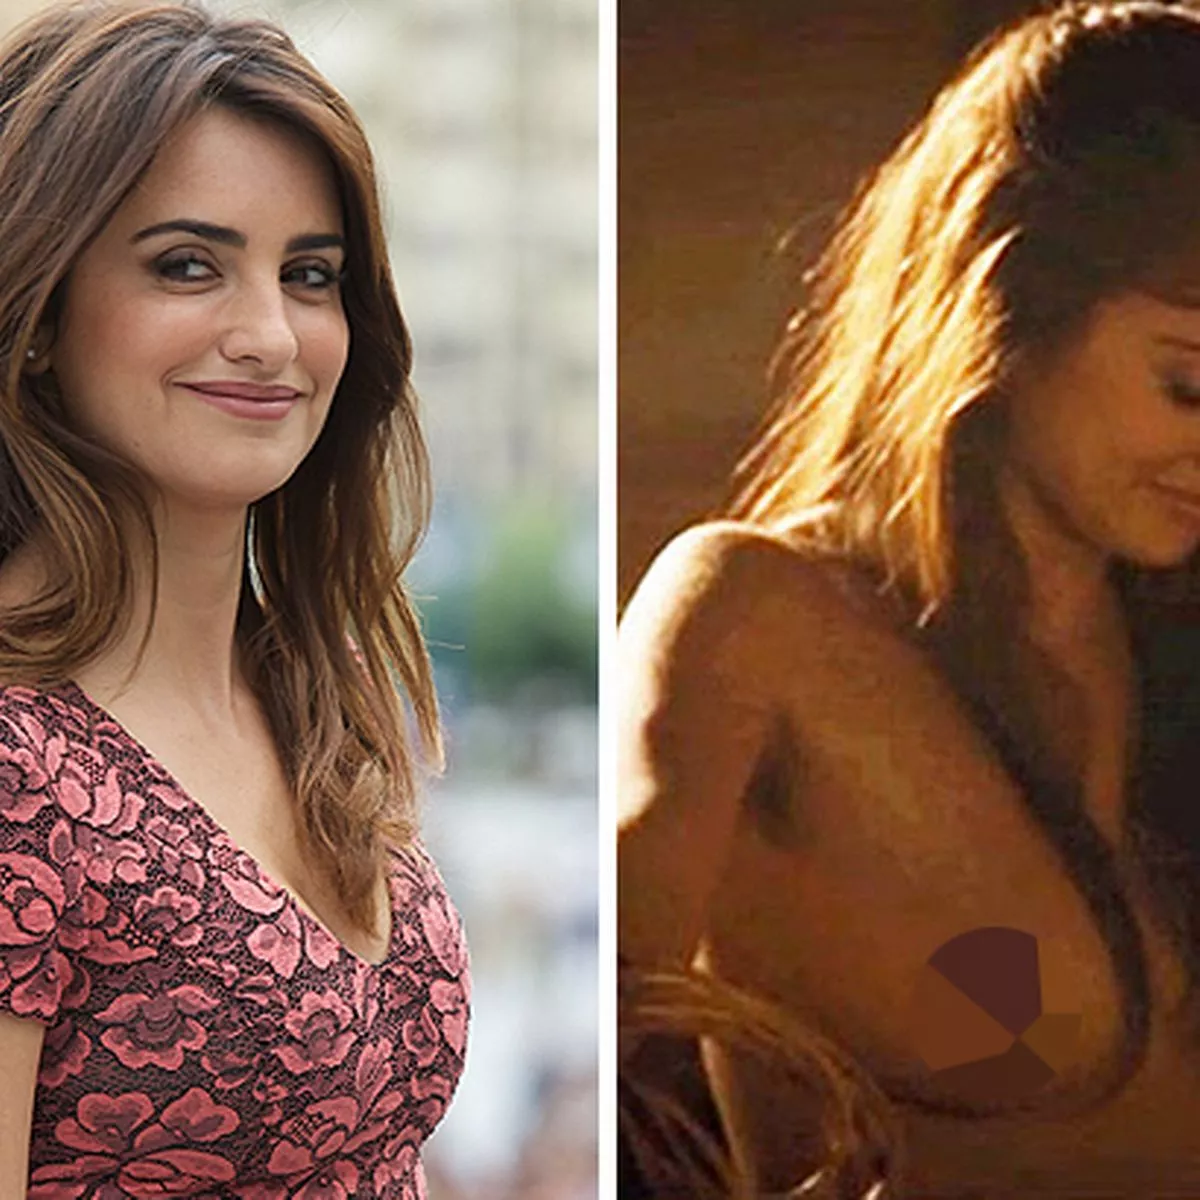 anna claire smith recommends penelope cruz hot movies pic